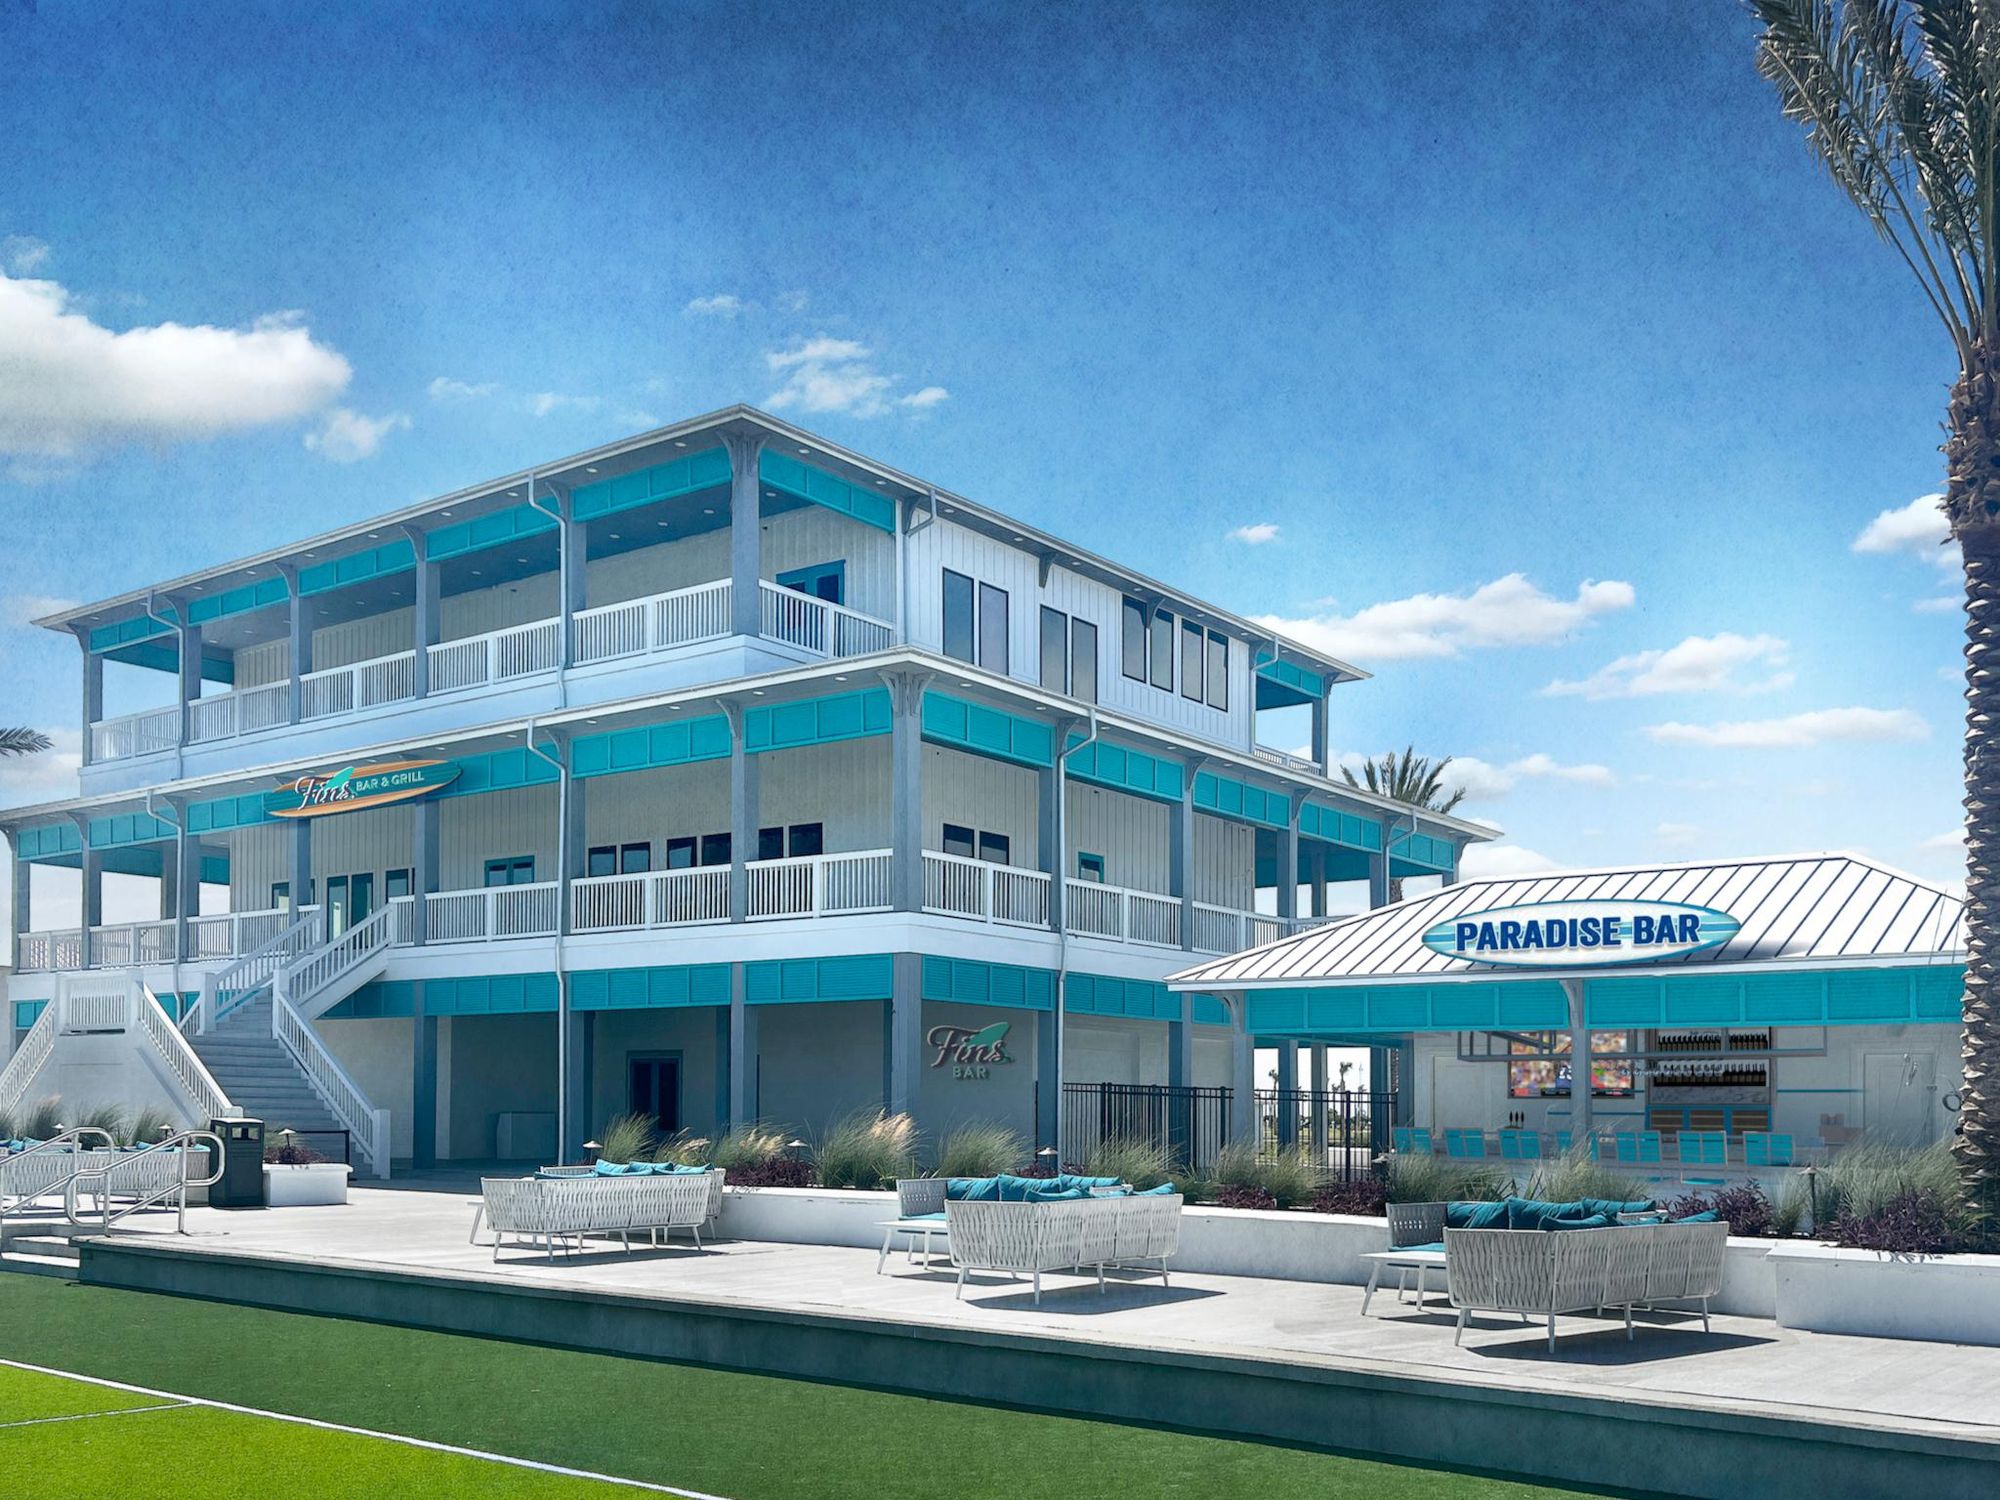 Margaritaville-inspired RV resort revs up near Galveston with Texas-sized pool and dog parks